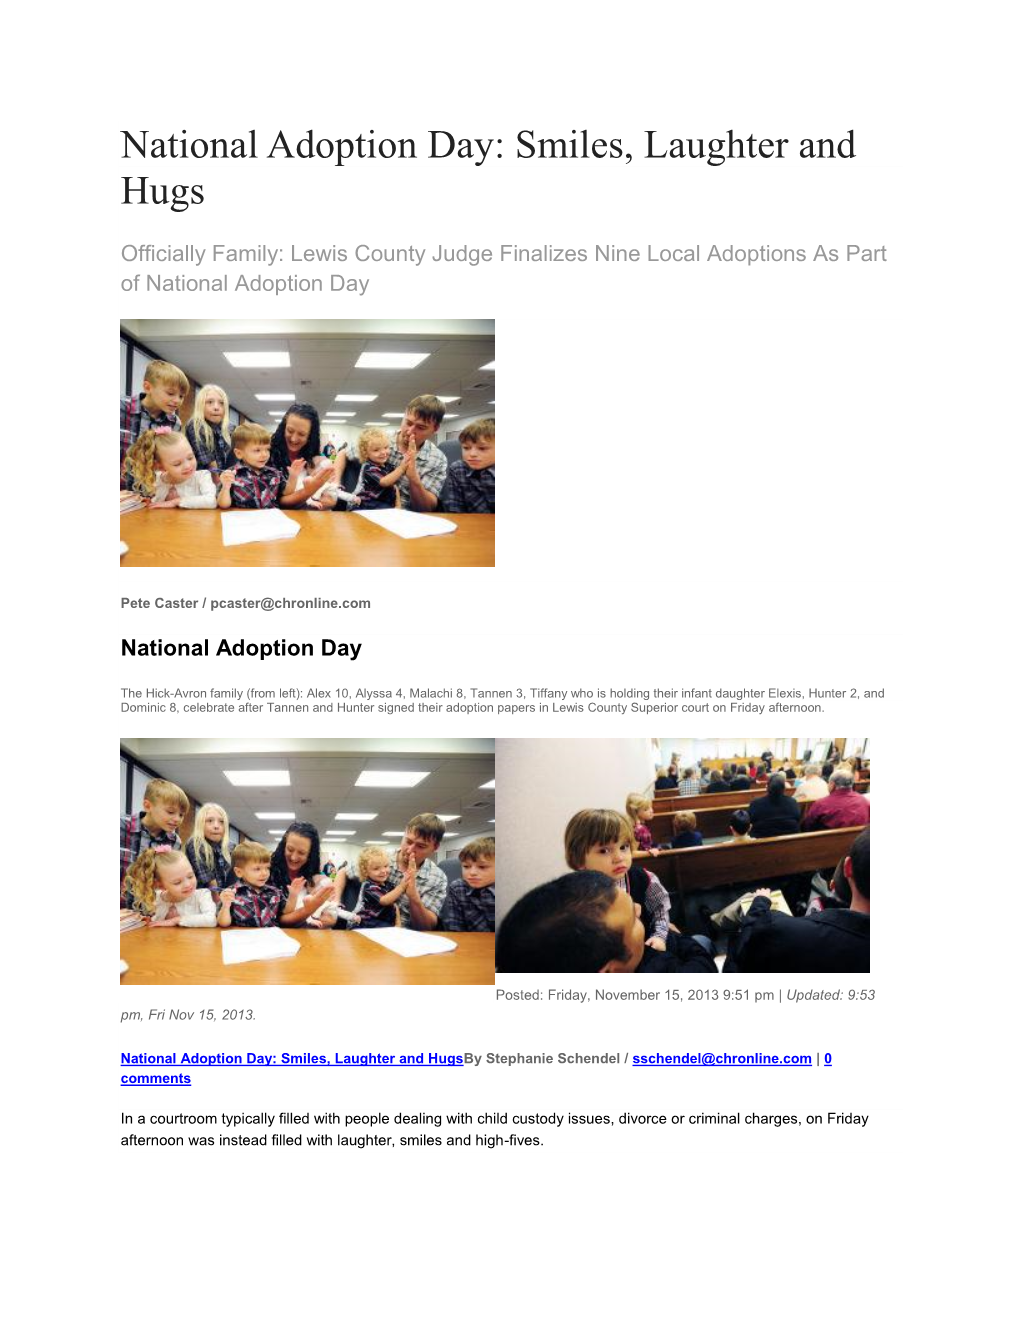 National Adoption Day: Smiles, Laughter and Hugs